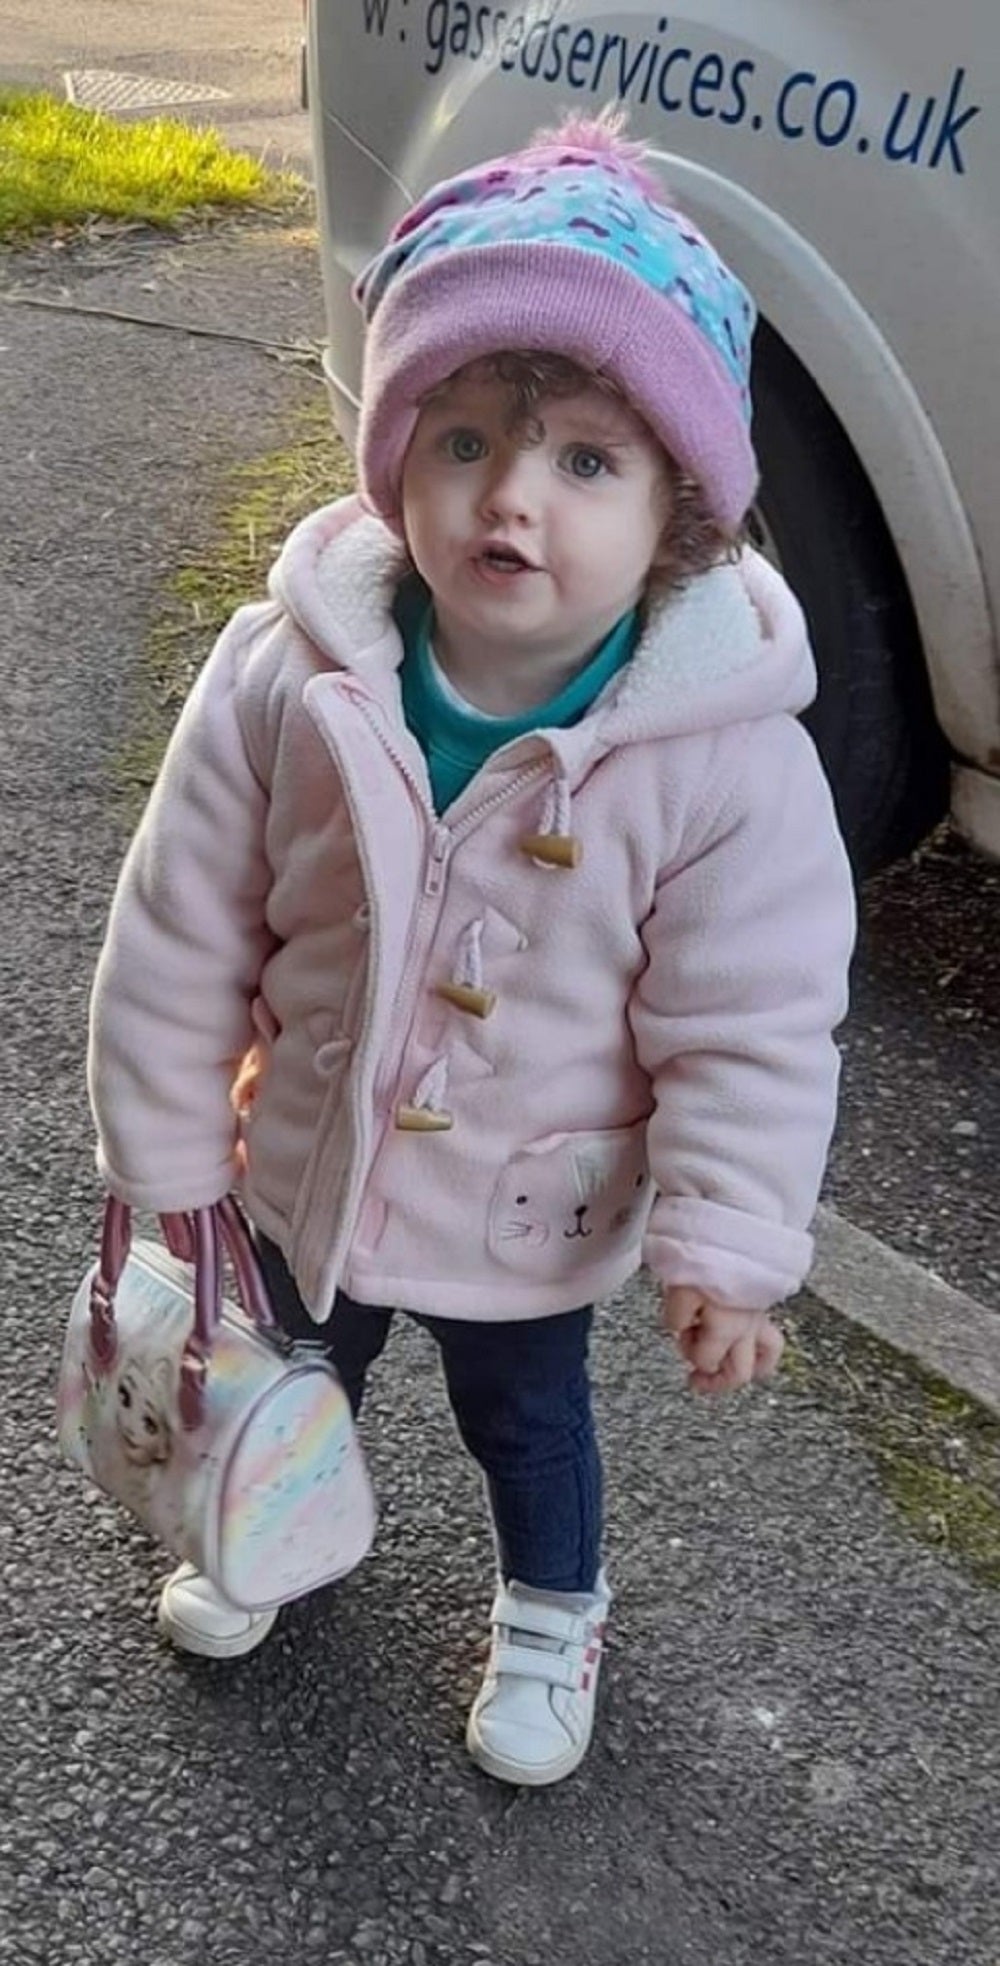 Shannon Cummins, 2, has fallen unconscious multiple times because her lockdown-weakened immune system cannot fight off viruses, according to her father (Mark Cummins/PA)